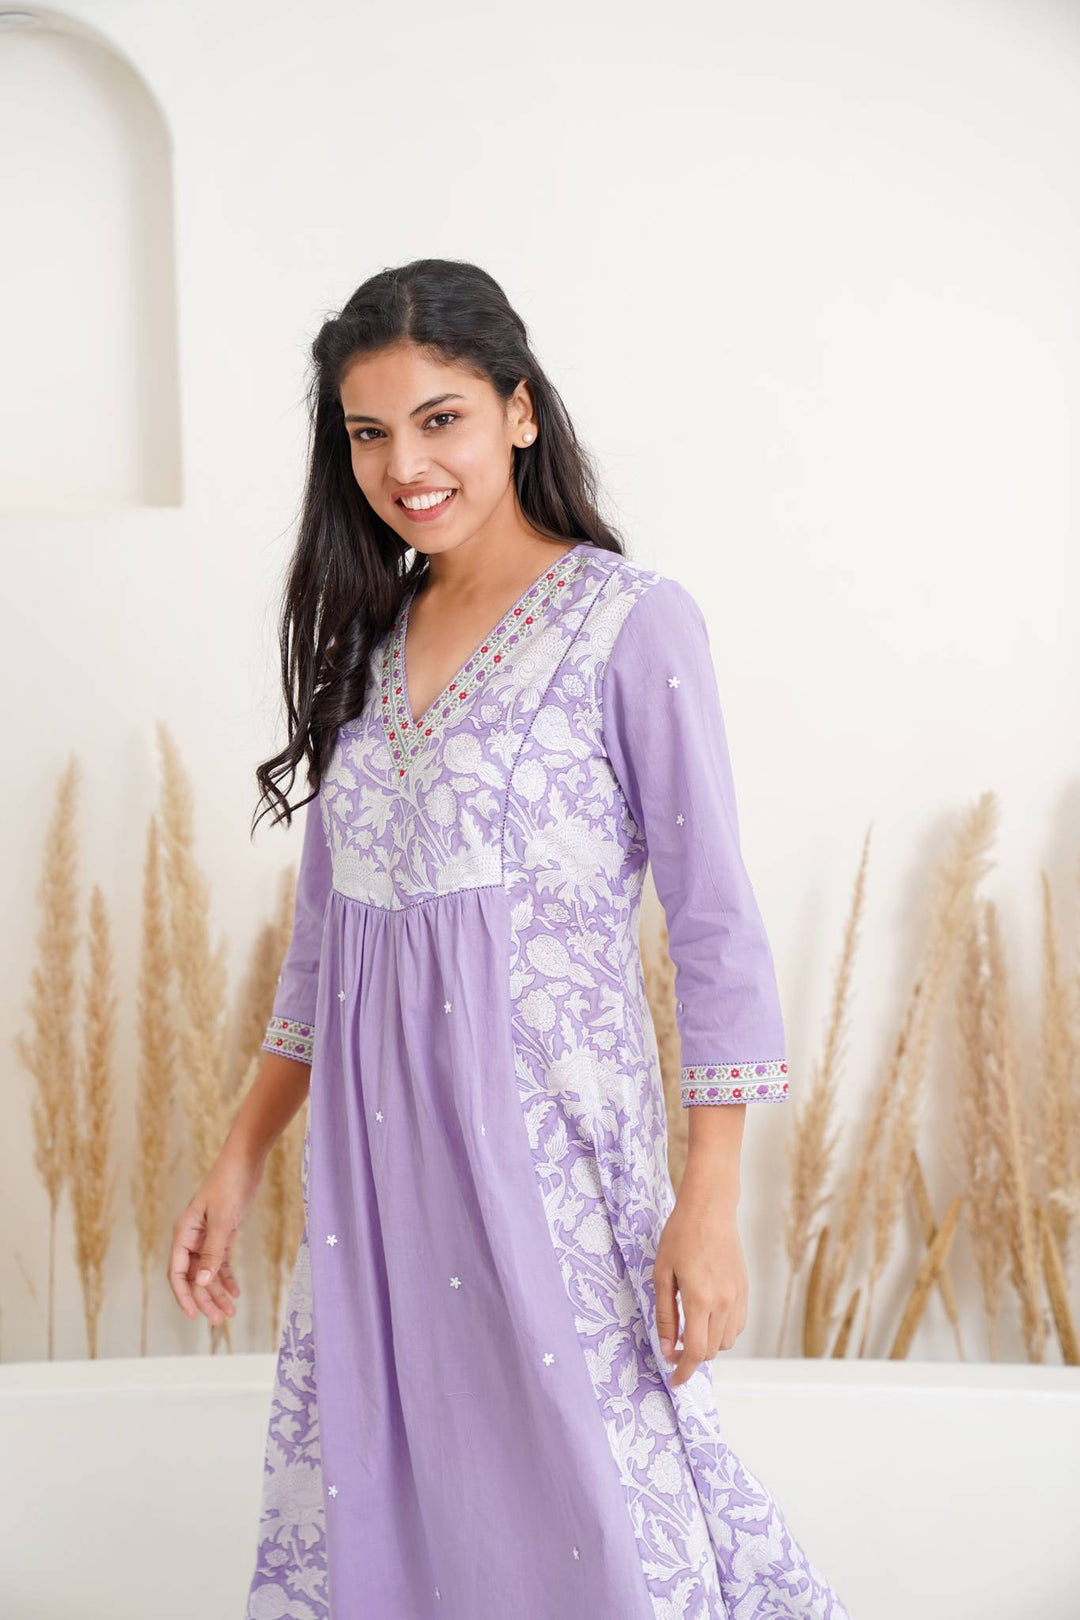 Cotton Dress - Buy Cotton Dress Online in India